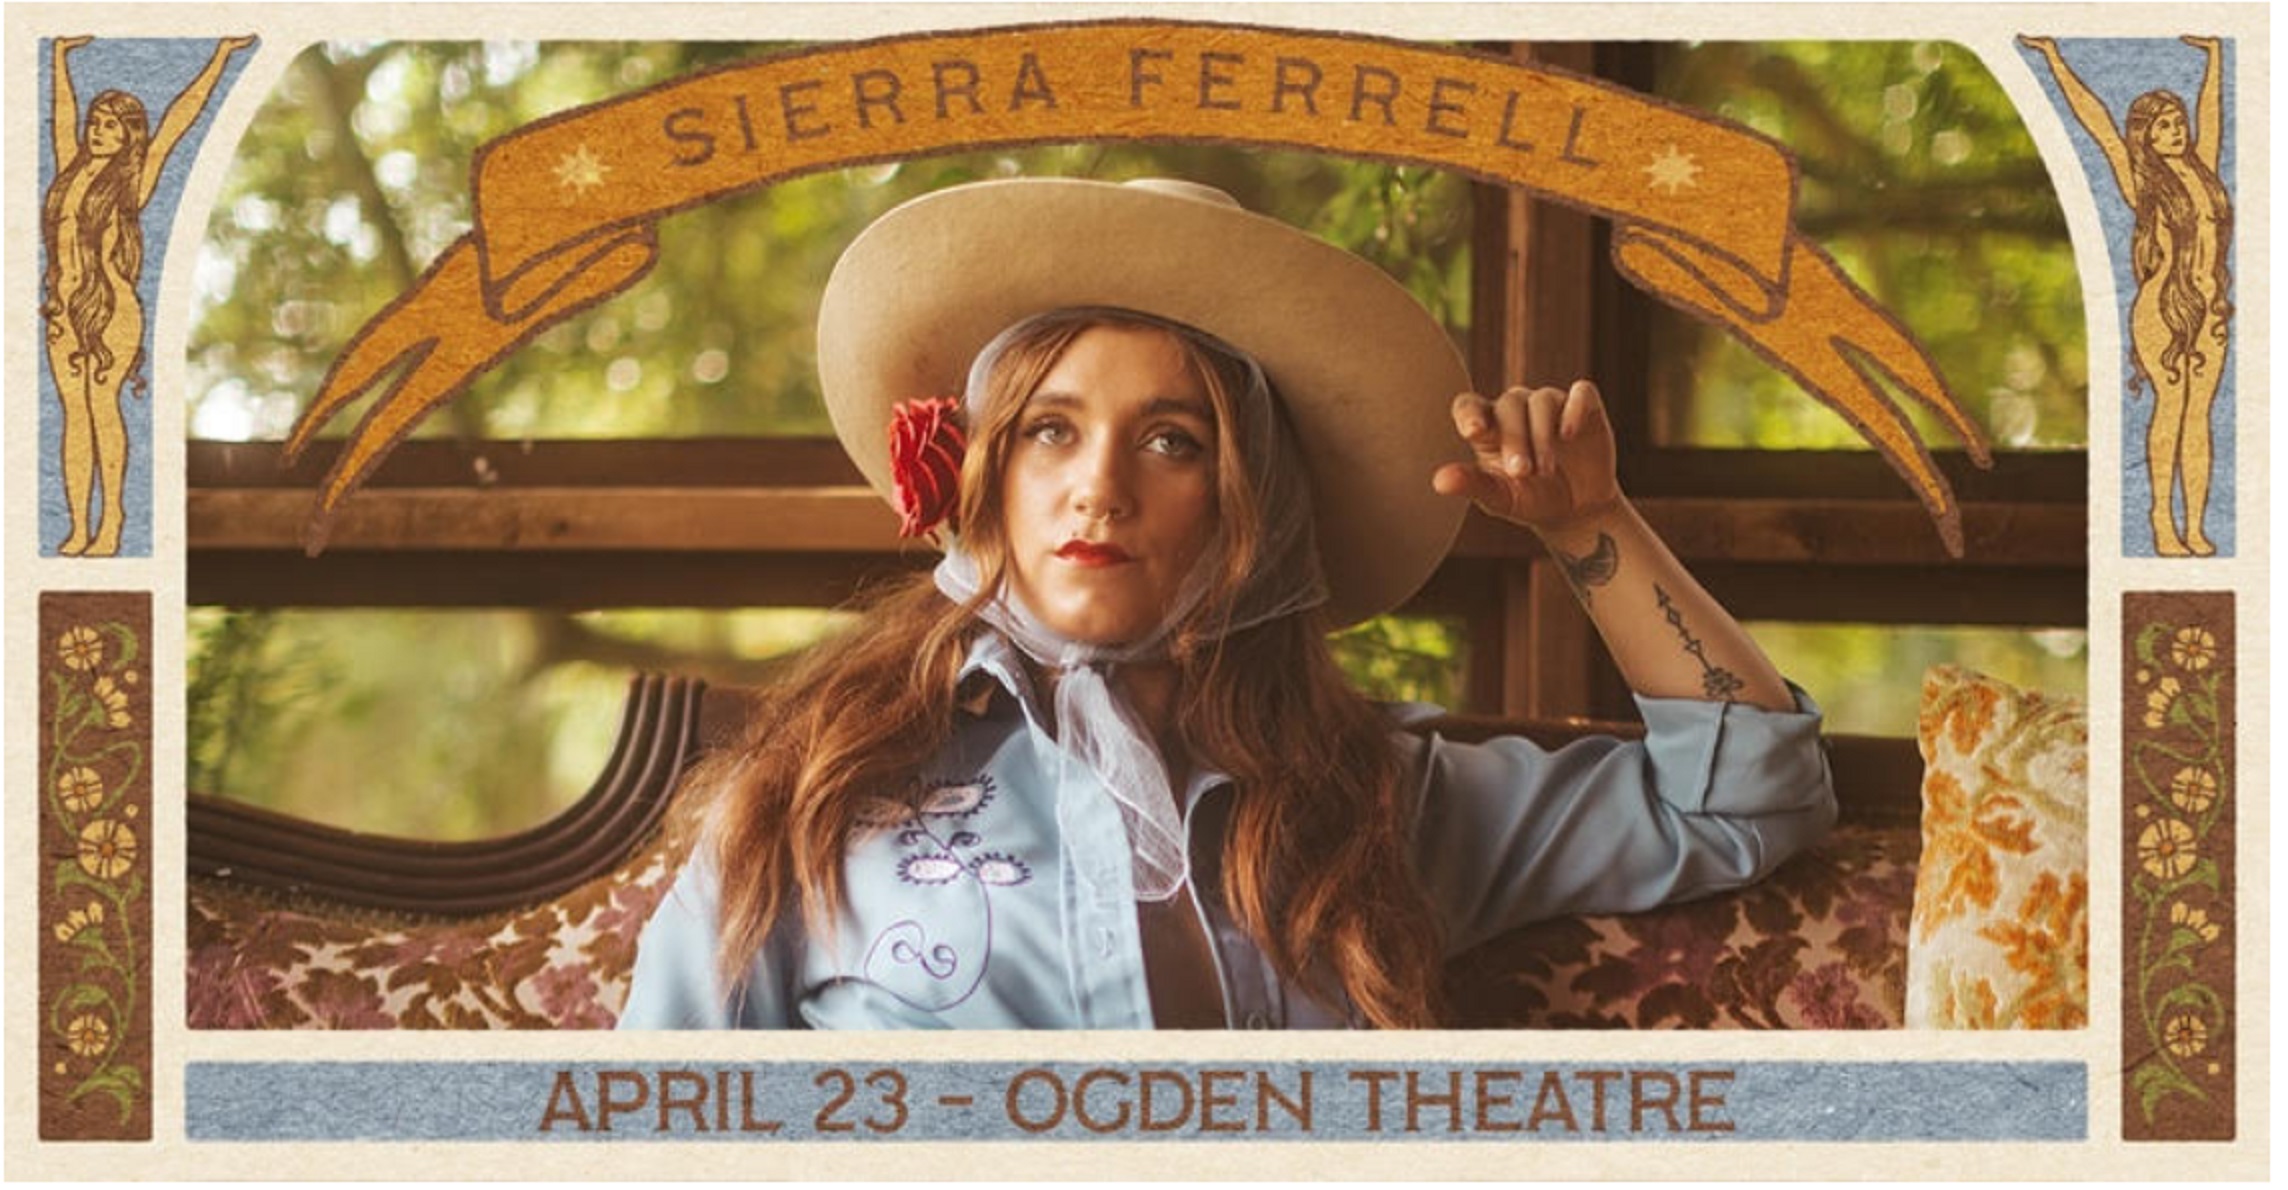 SIERRA FERRELL to play The Ogden Theatre on Sunday, April 23, 2023